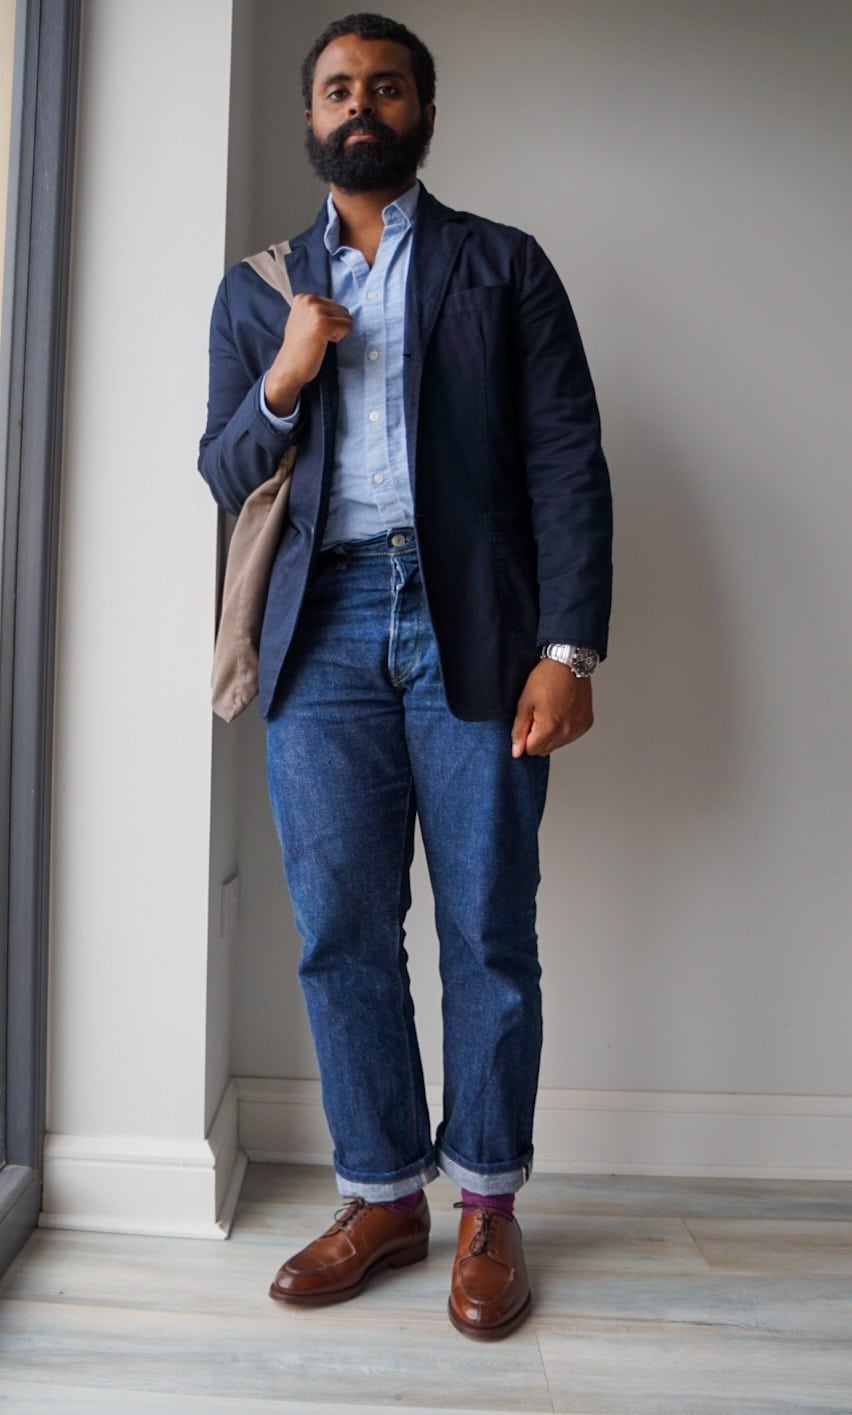 Blue Blazer with Black Jeans Outfits For Men (52 ideas & outfits